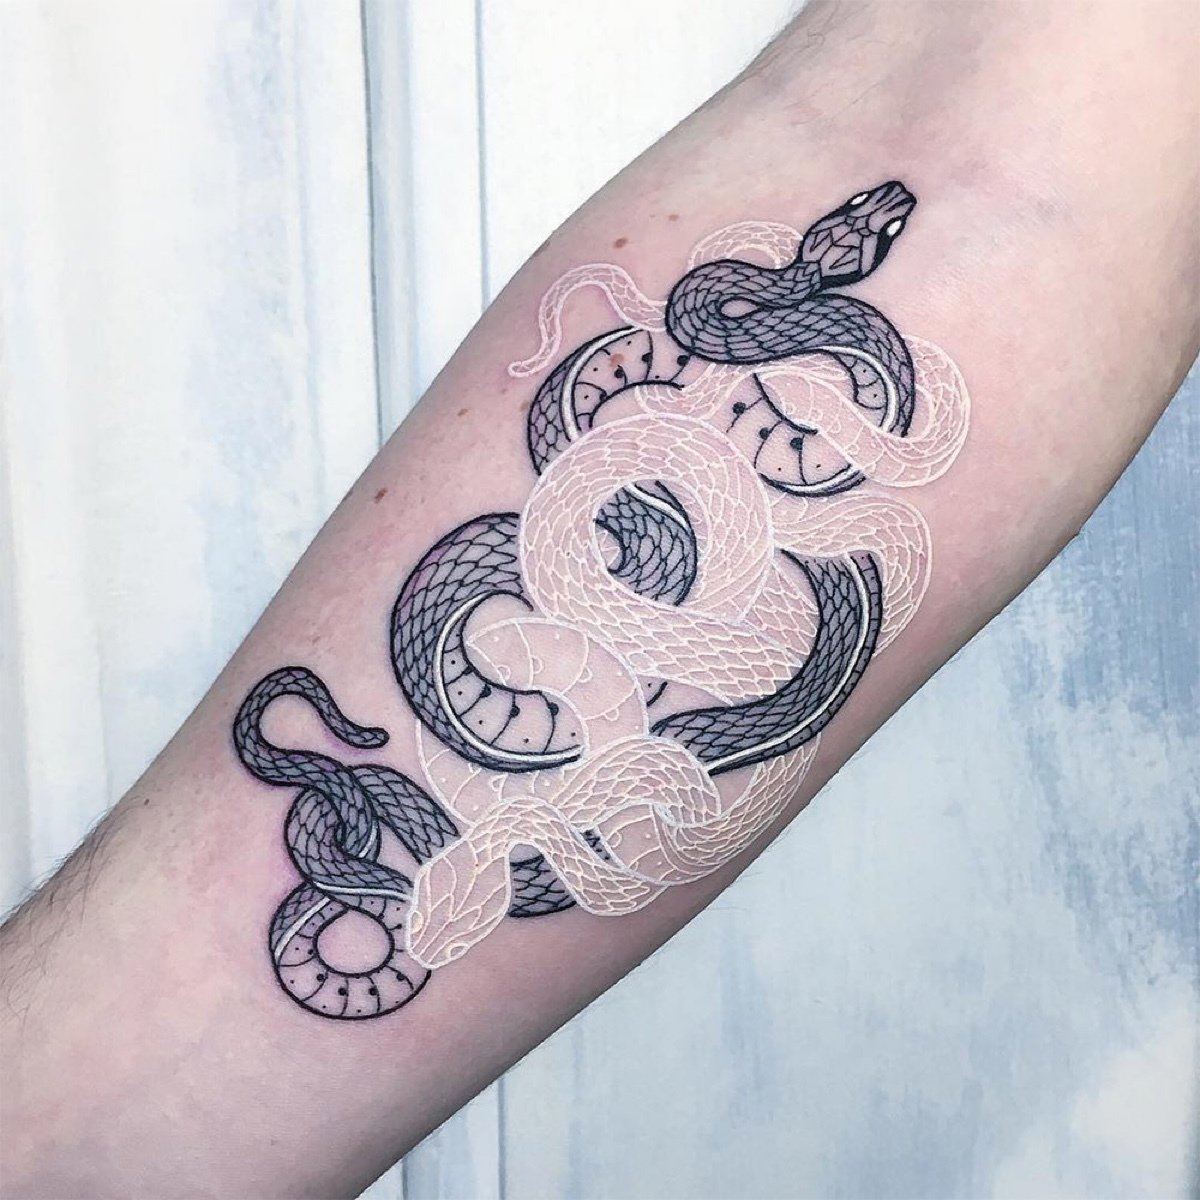 White Ink Tattoos: Pros and Cons